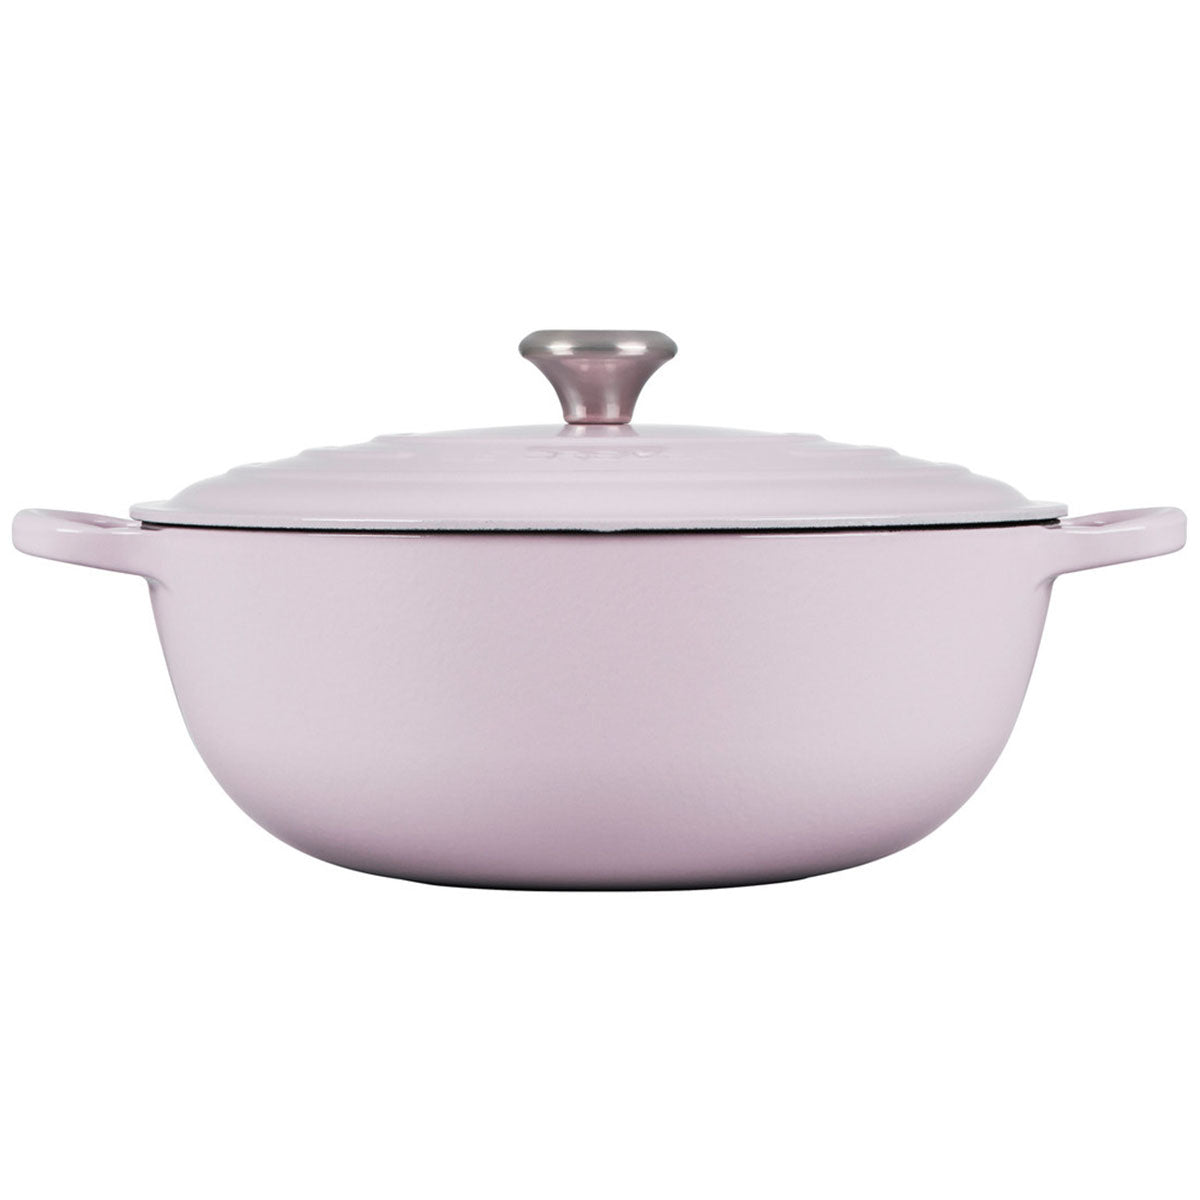 Le Creuset Signature Enameled Cast Iron Chef's Oven With Stainless Steel  Knob, 7.5-Quart